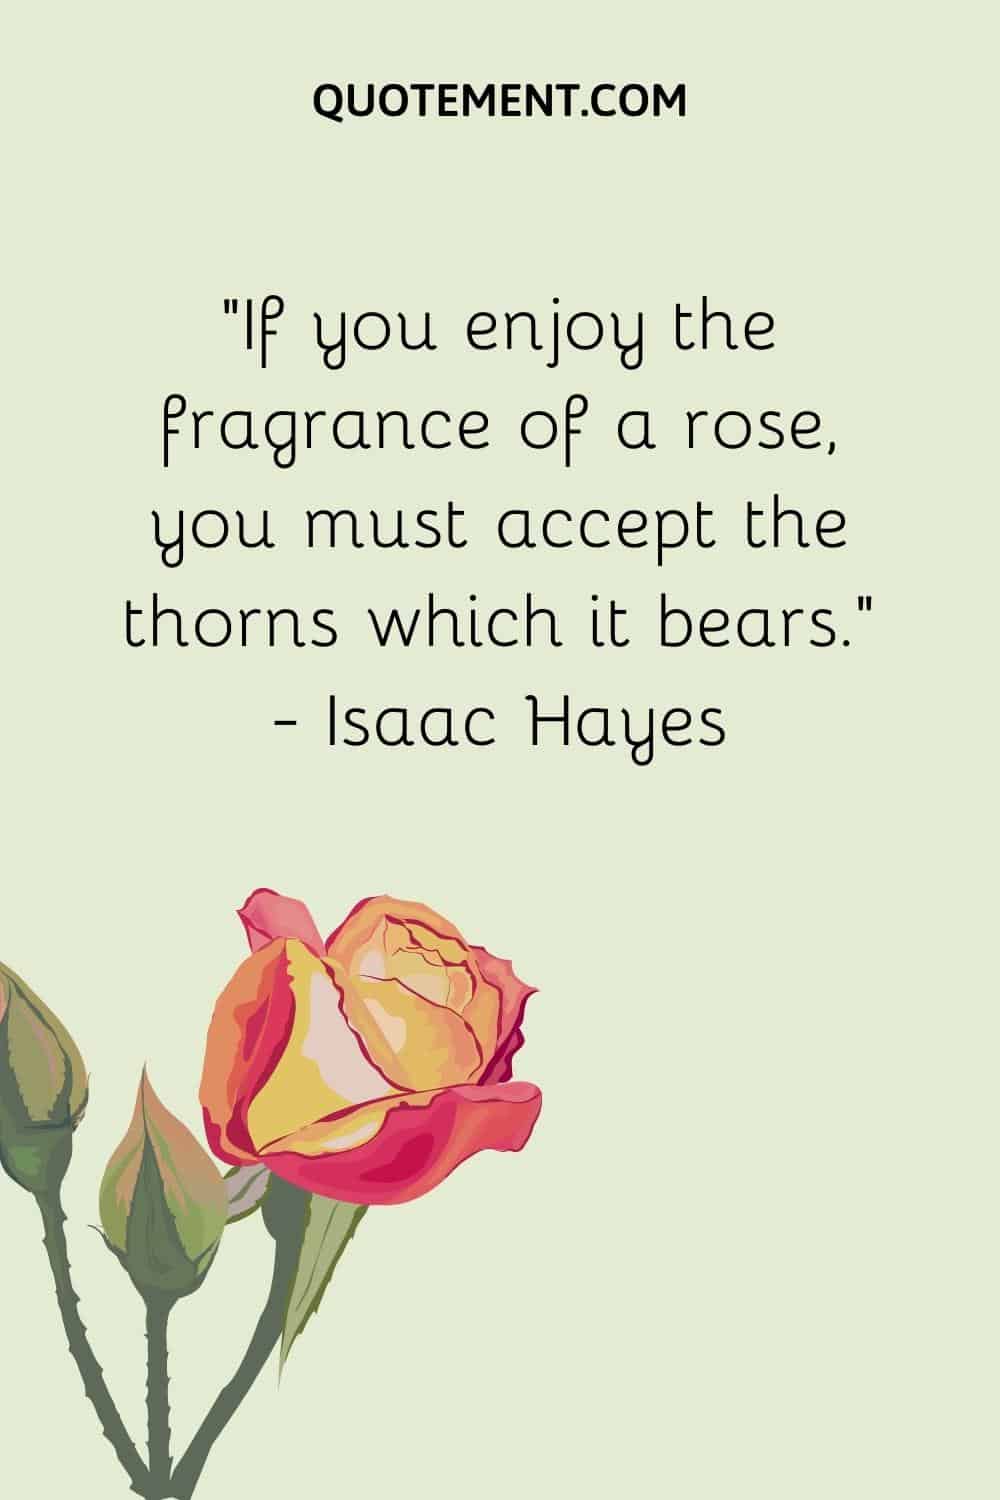 “If you enjoy the fragrance of a rose, you must accept the thorns which it bears.” — Isaac Hayes